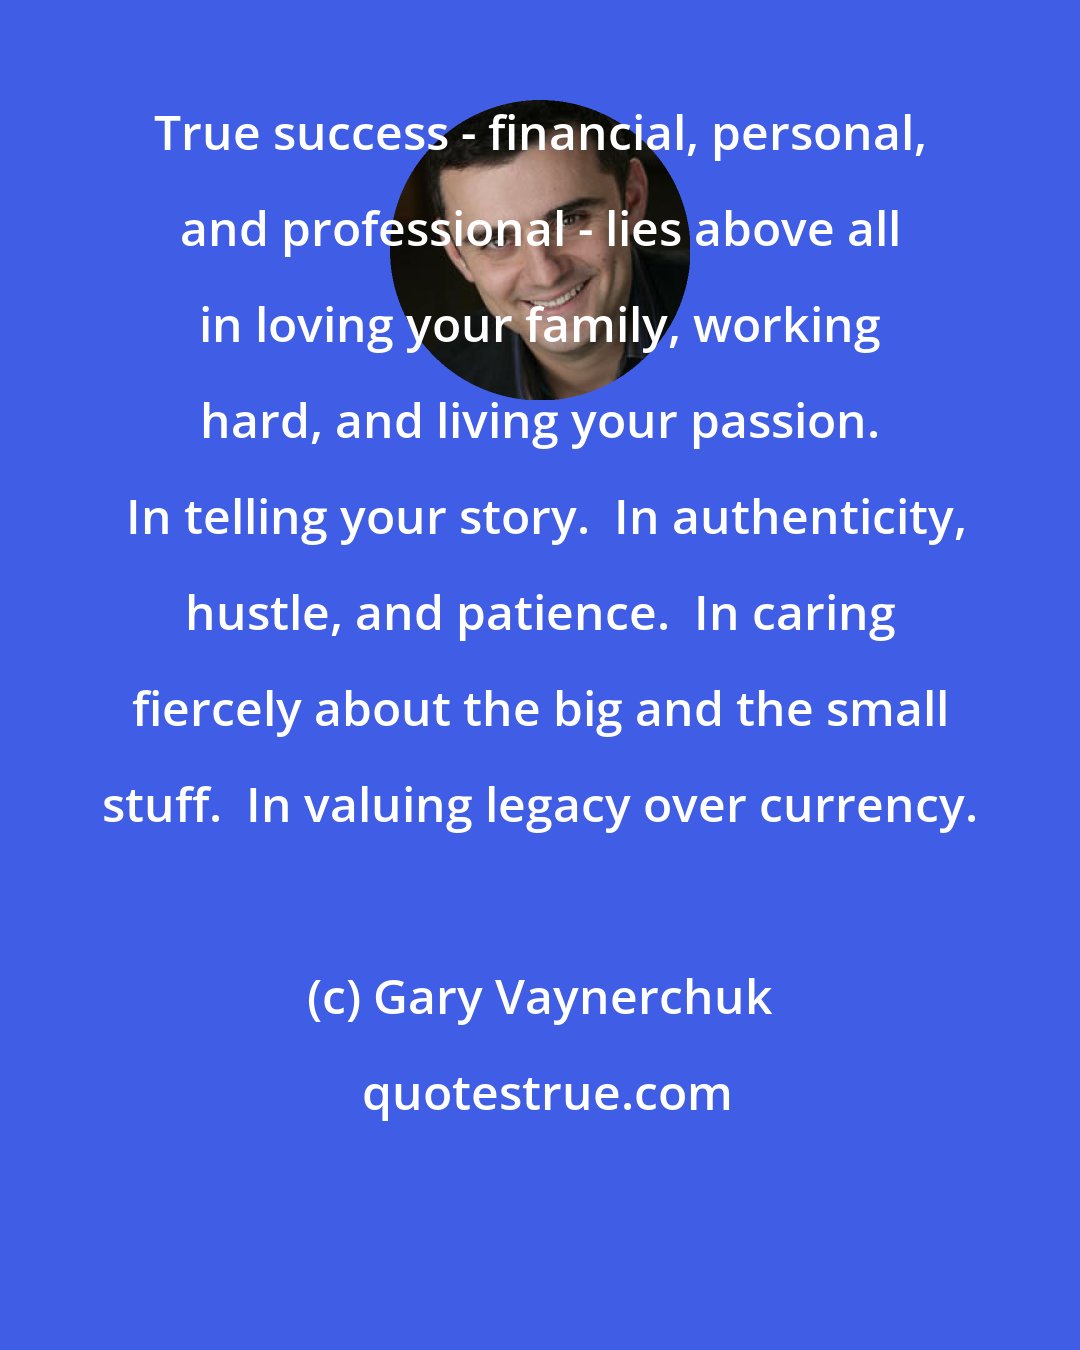 Gary Vaynerchuk: True success - financial, personal, and professional - lies above all in loving your family, working hard, and living your passion.  In telling your story.  In authenticity, hustle, and patience.  In caring fiercely about the big and the small stuff.  In valuing legacy over currency.